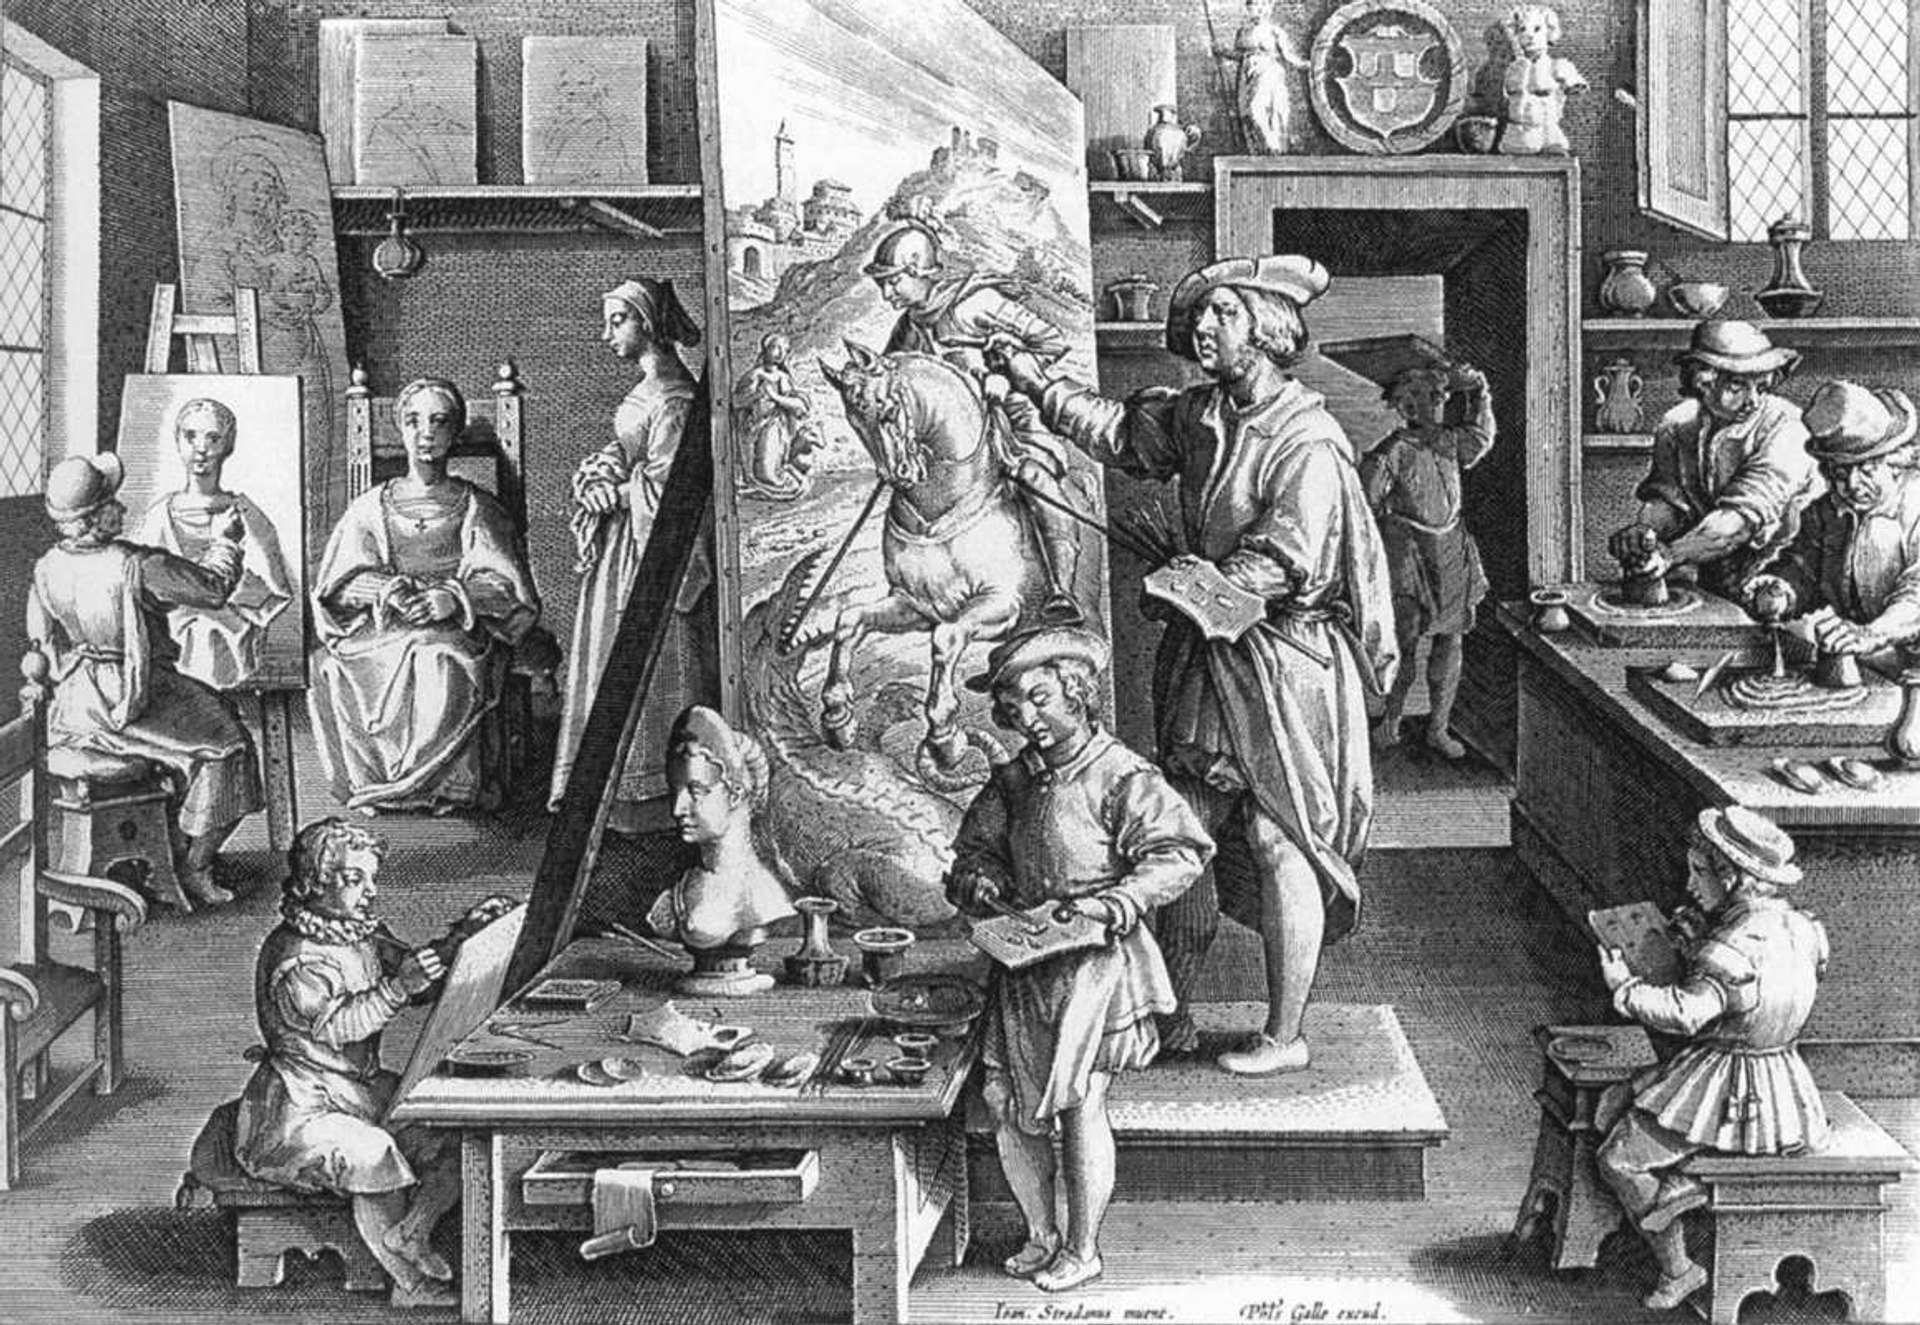 An image of a print showing A Painter’s Workshop, by artist Philips Galle. It shows several people engrossed in different aspects of the painting process, from stretching canvases to mixing pigments and painting itself.